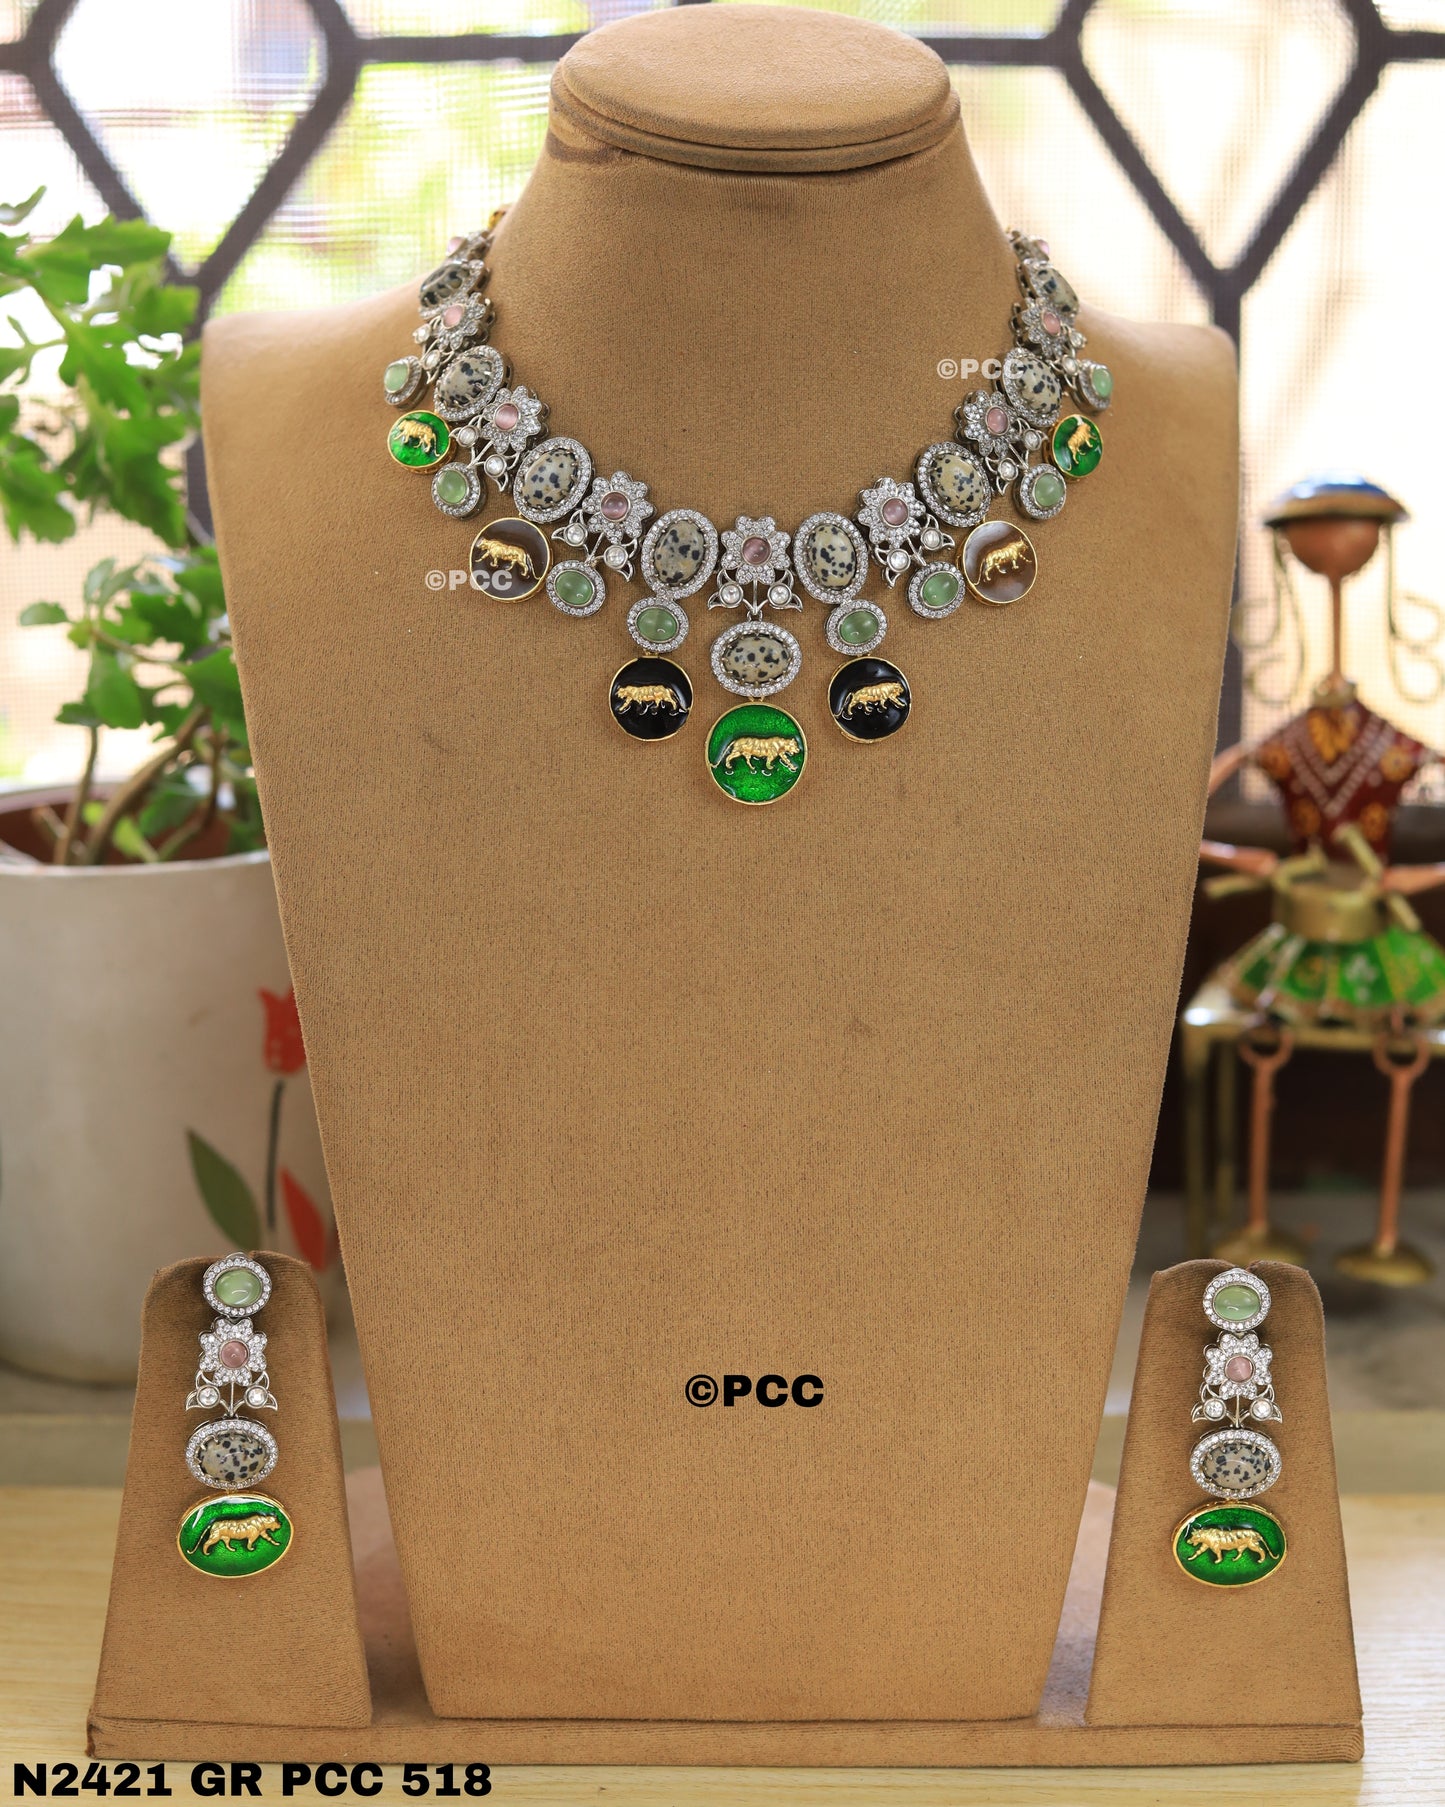 Round Neck Kundan Necklace set with Earrings.